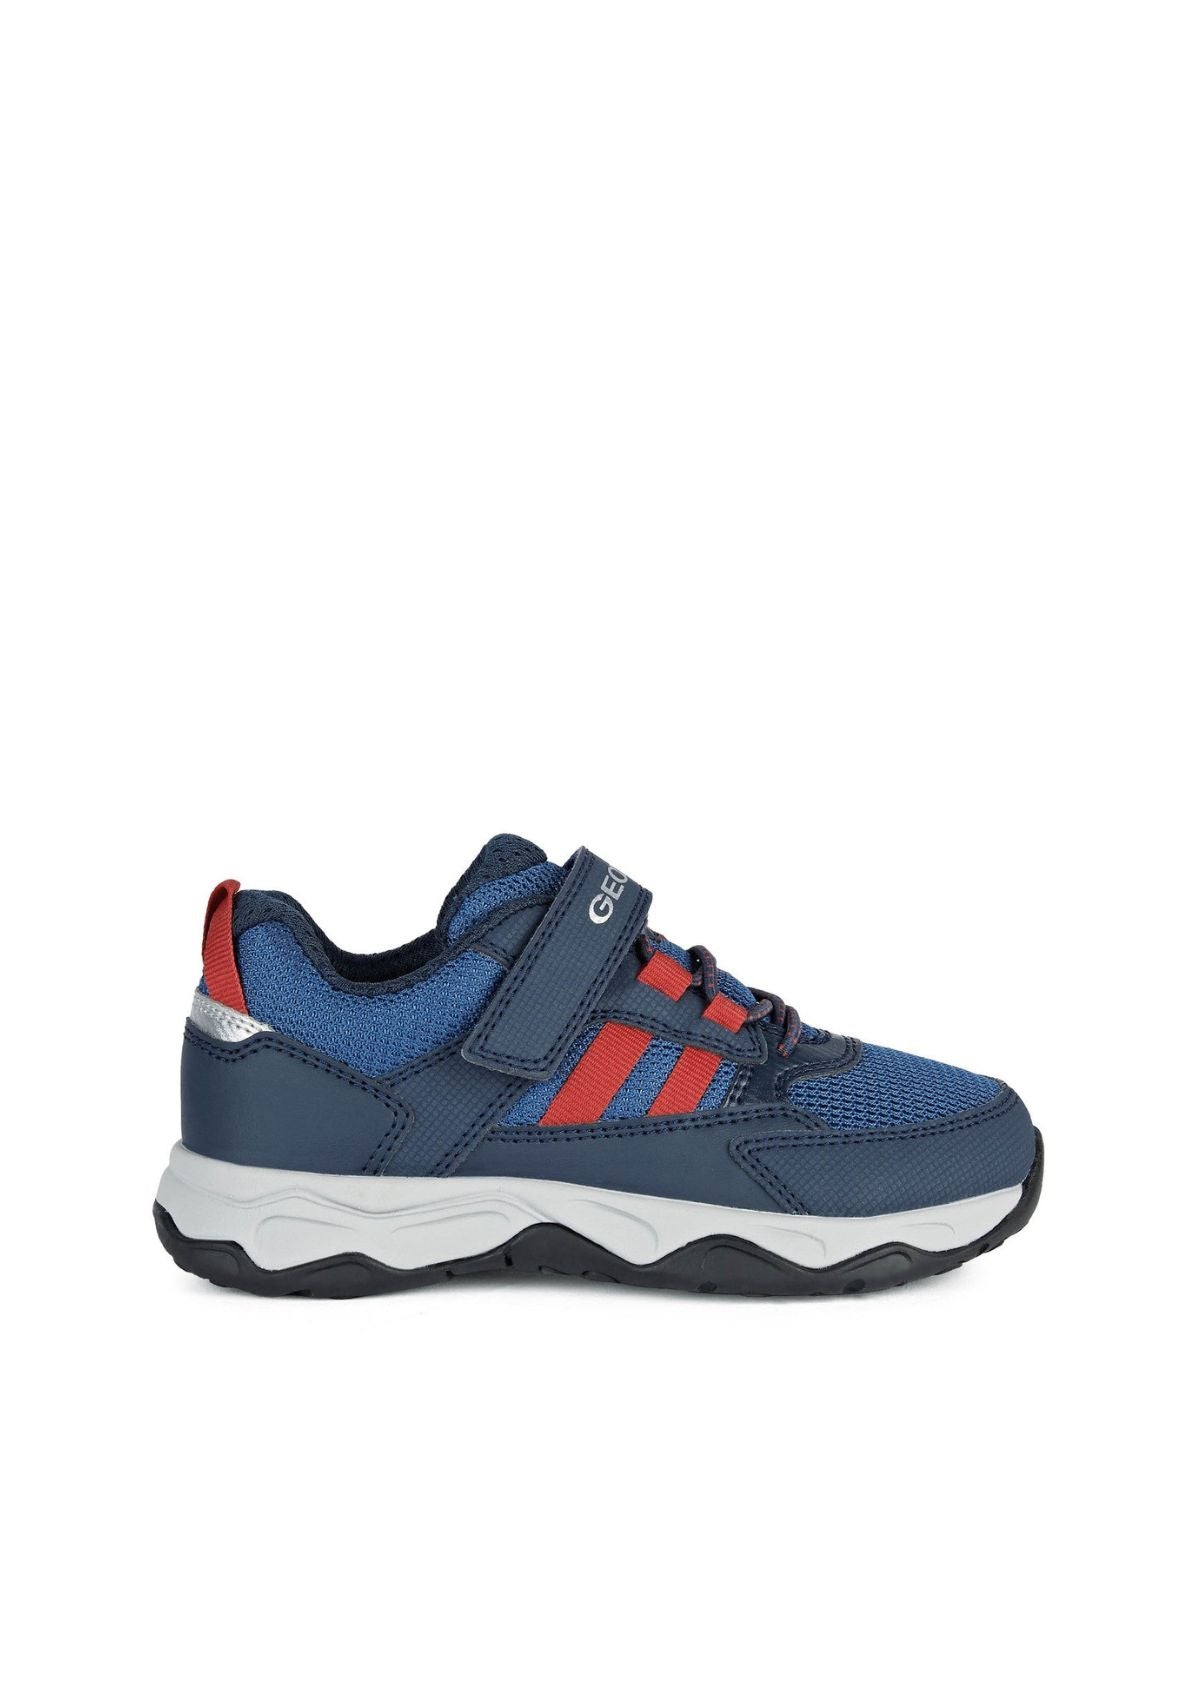 Geox Boys CALCO Navy Red side